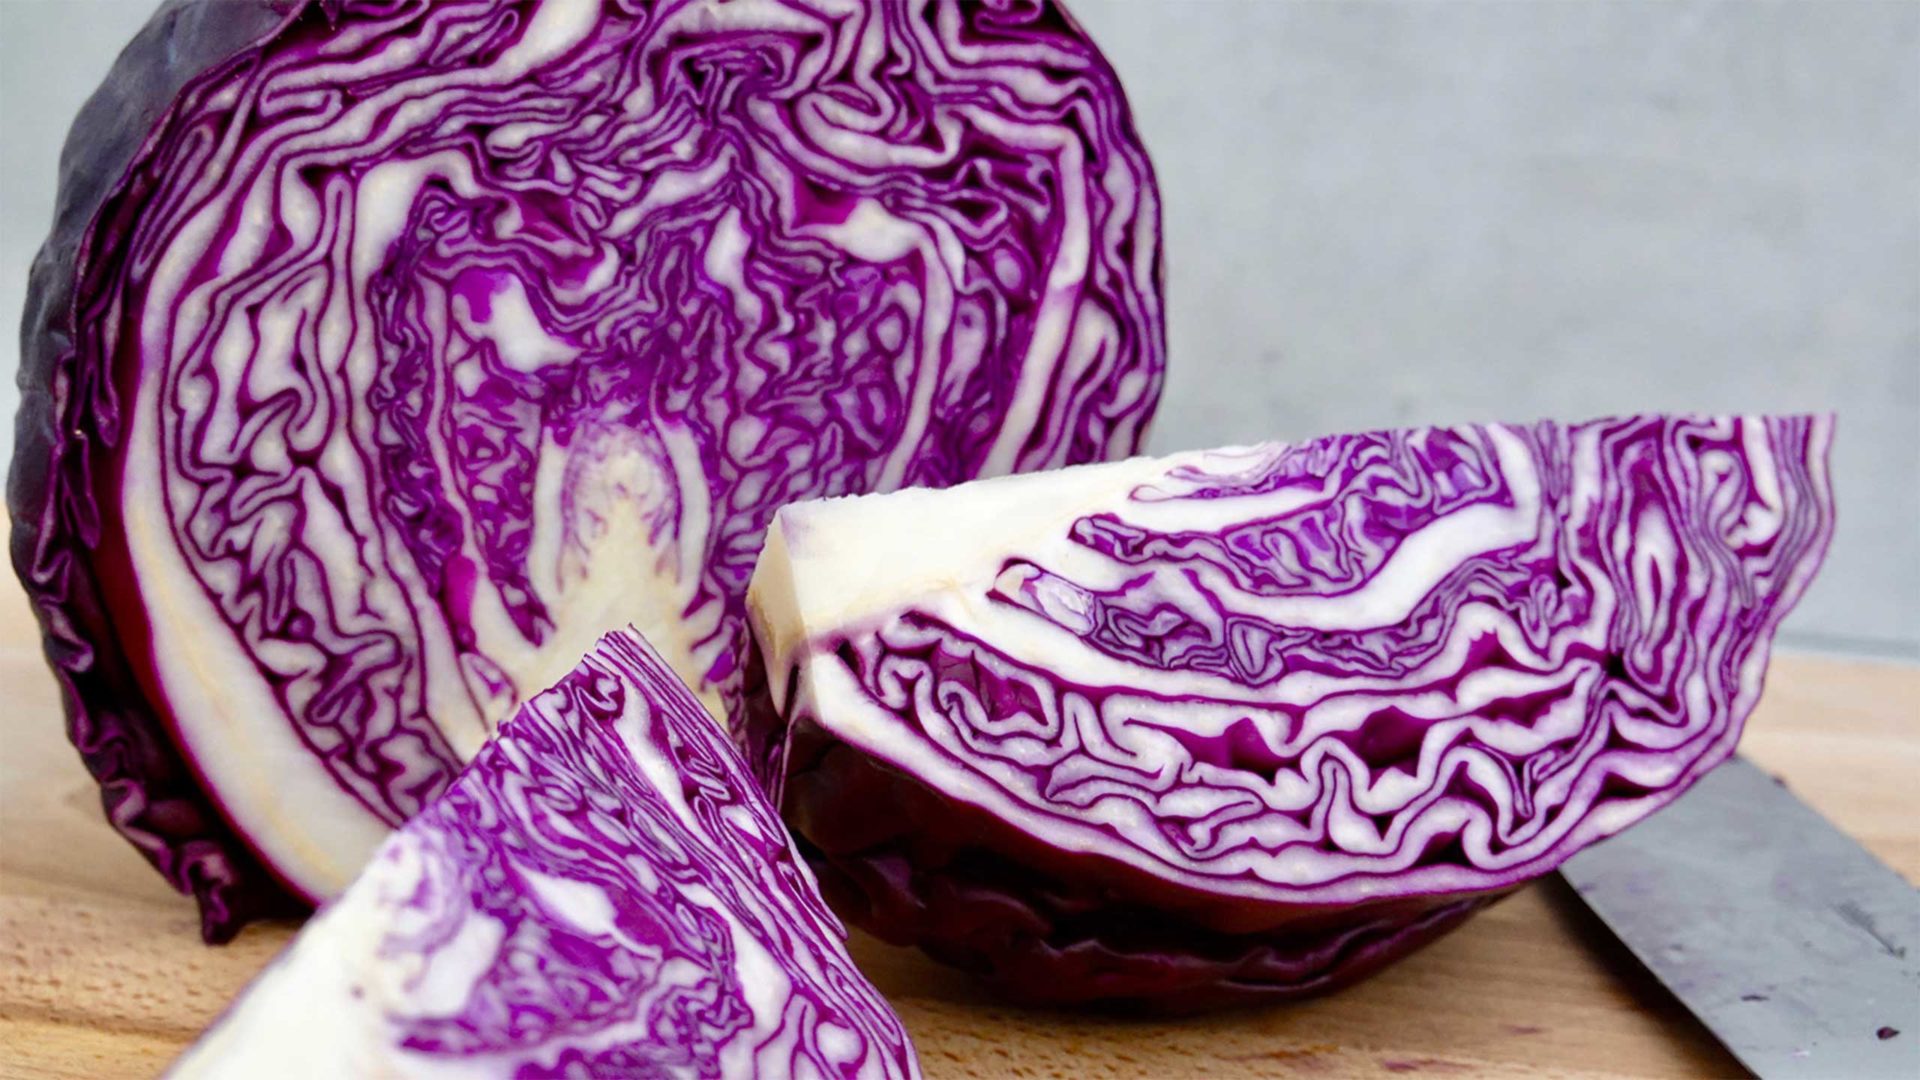 A cut head of red cabbage